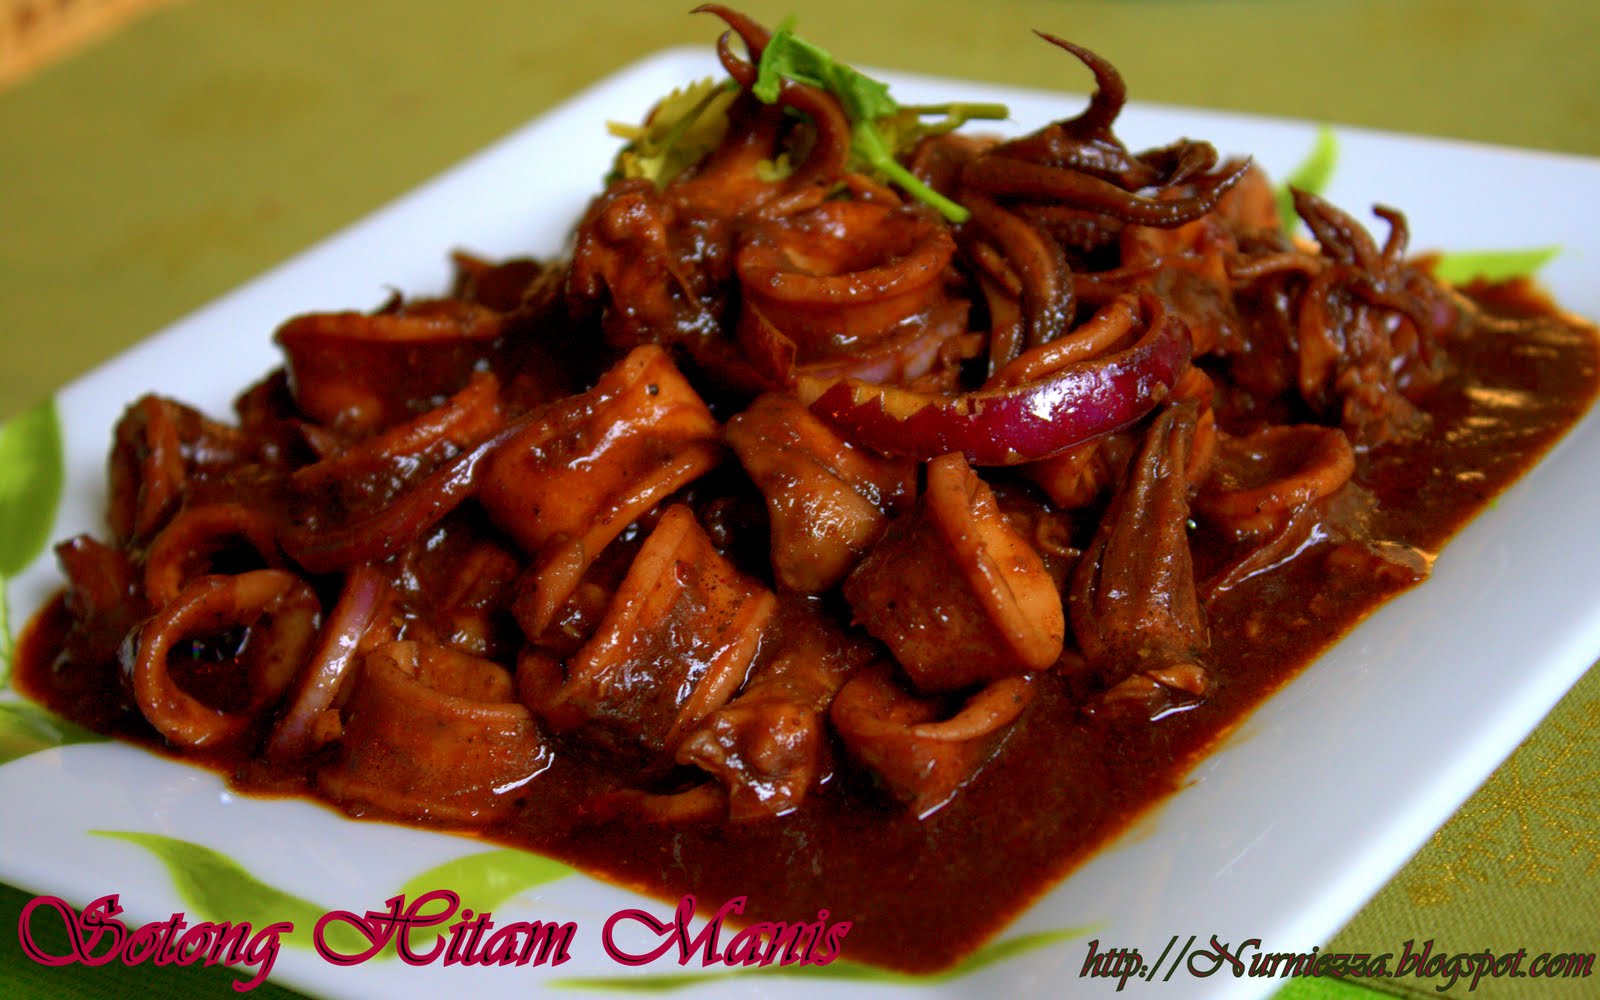 Our Journey Begins: Sotong Hitam Manis